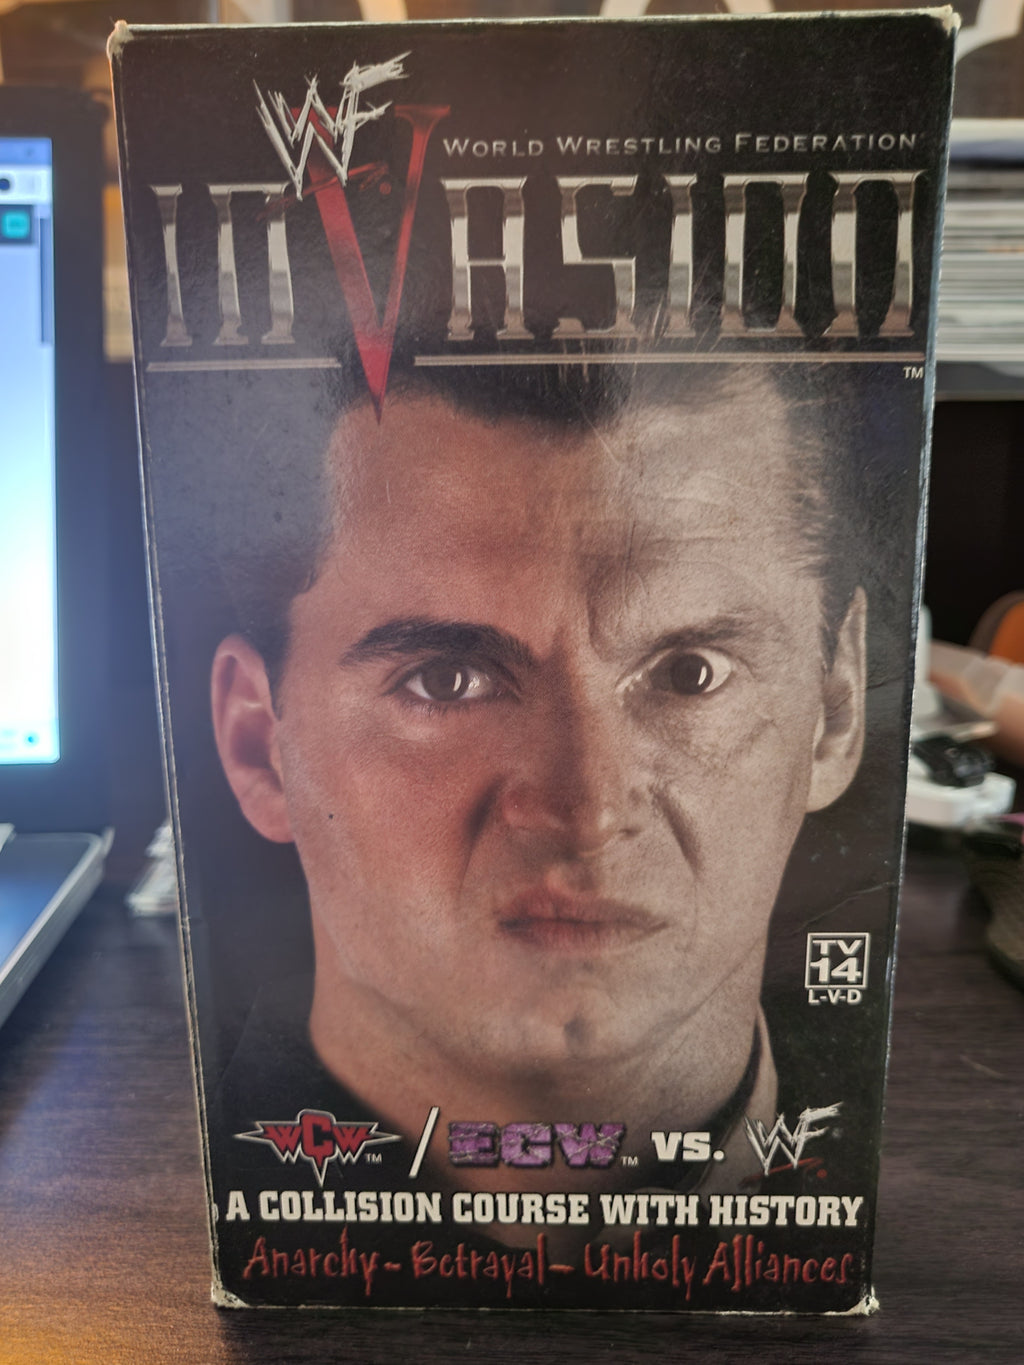 WWF Invasion 2001 Official VHS Wrestling Tape - WCW/ECW Vs. WWF WWE